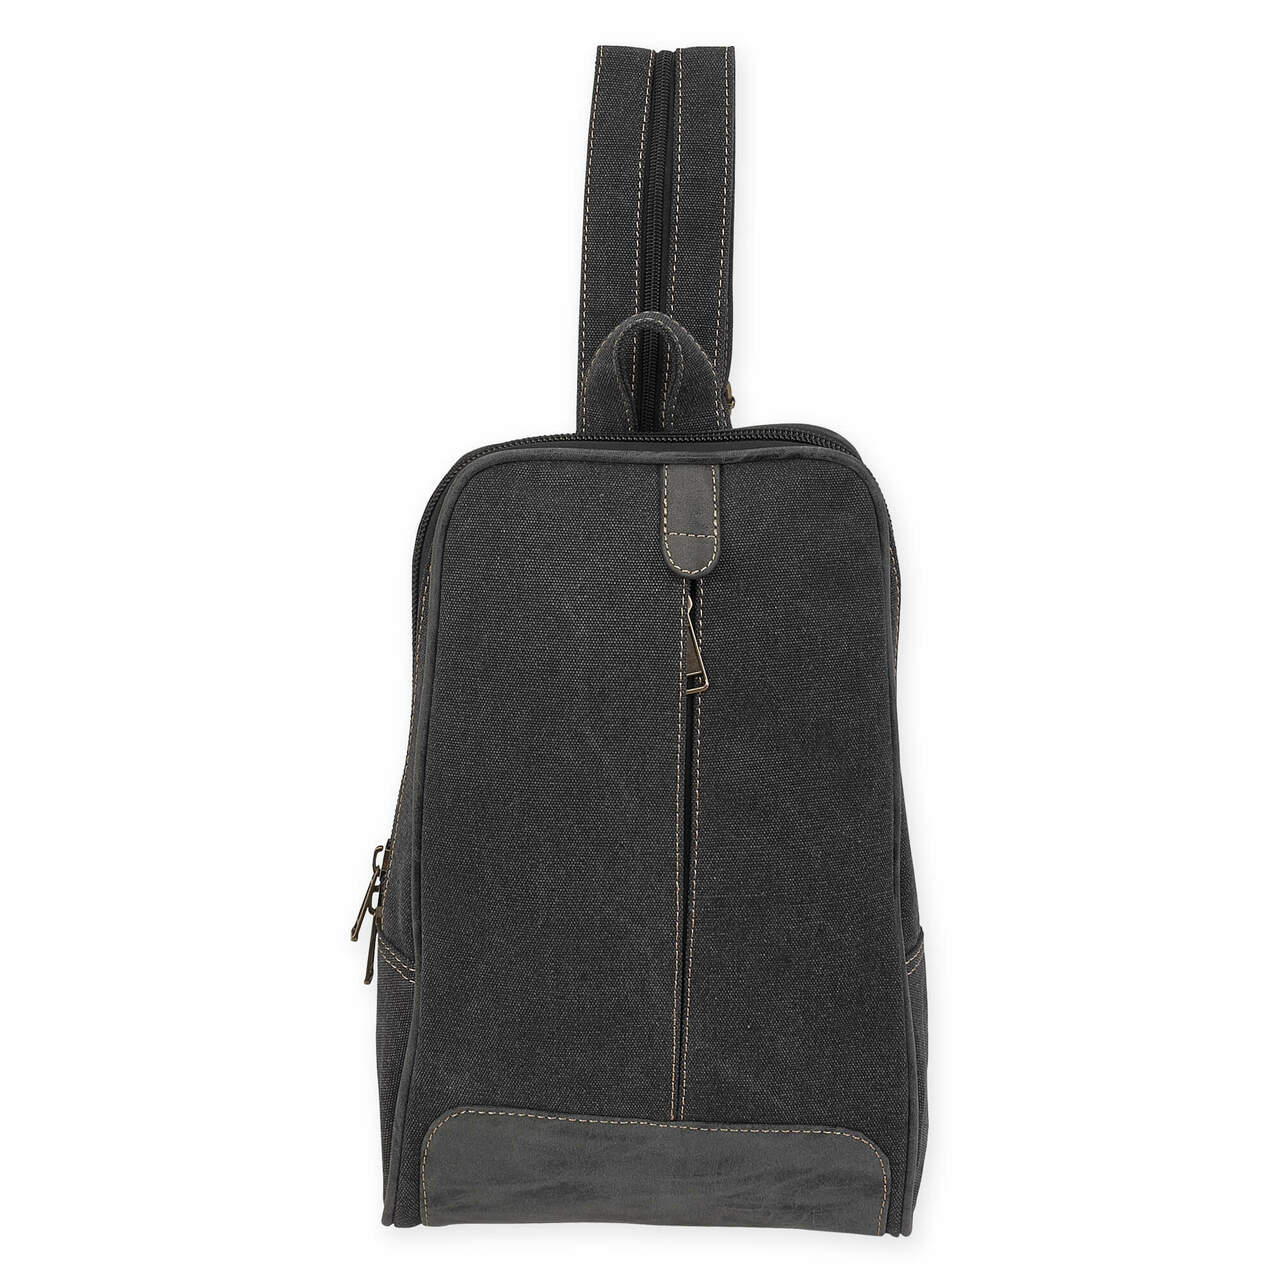 Washed Canvas Charcoal Leather Sling/Backpack